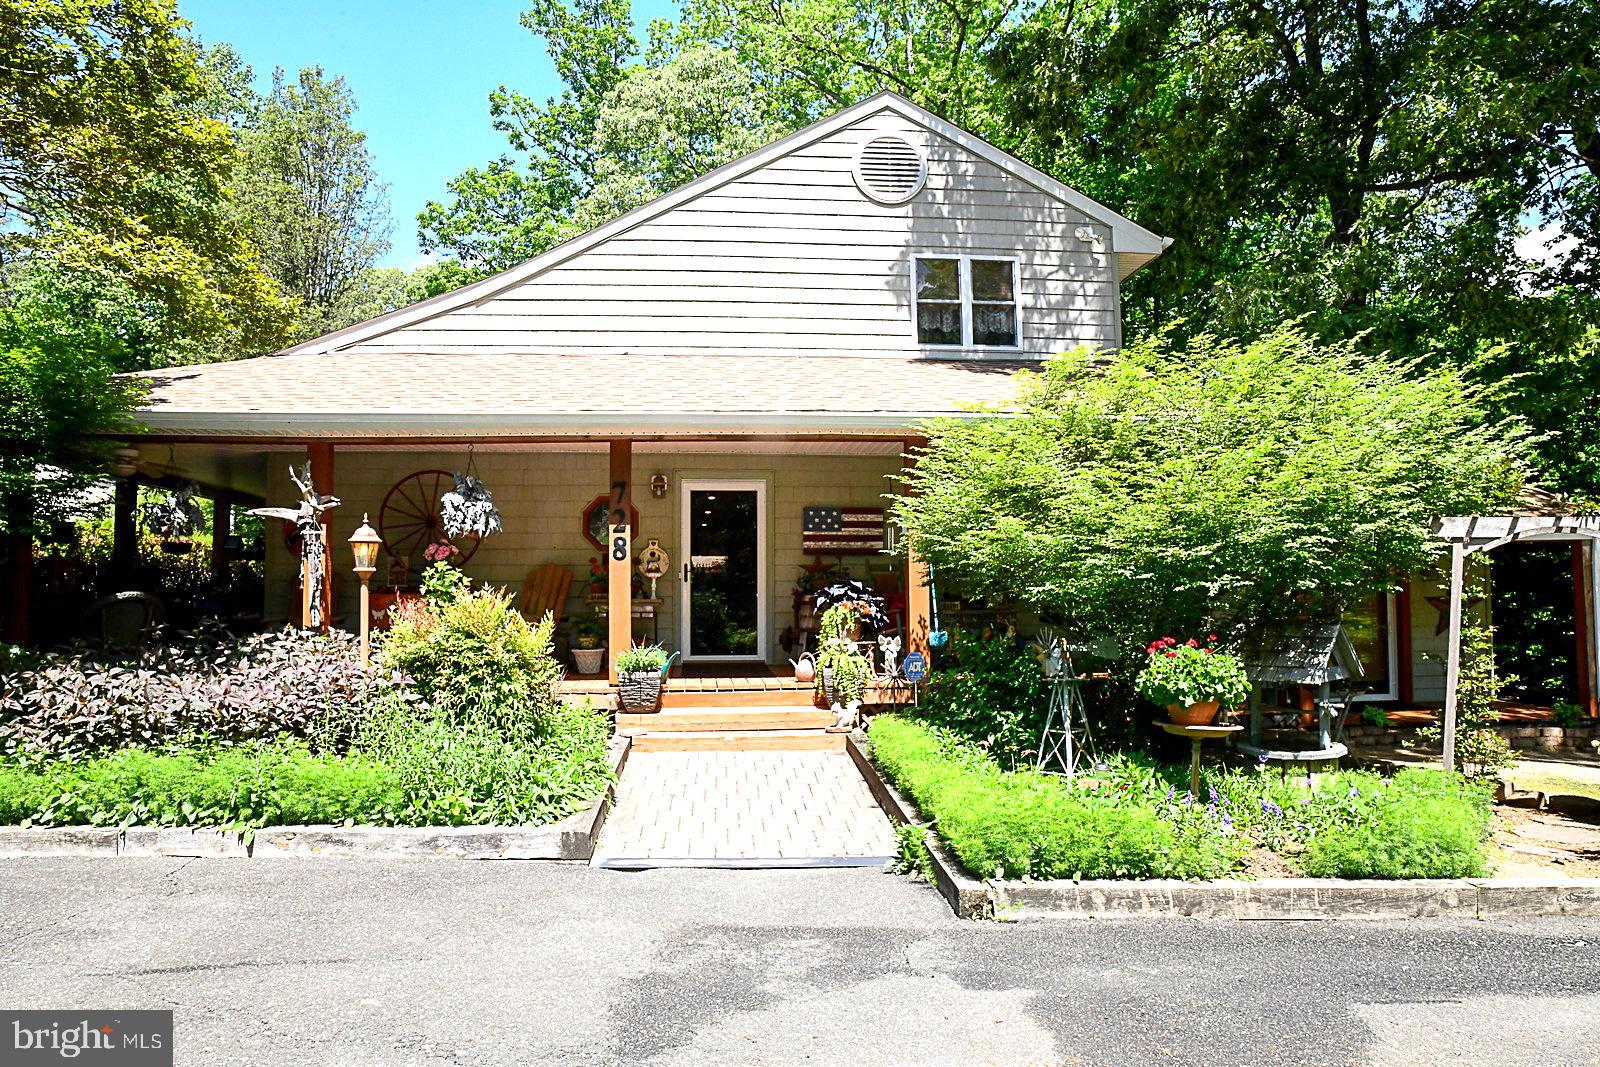 a front view of a house with a garden and plants